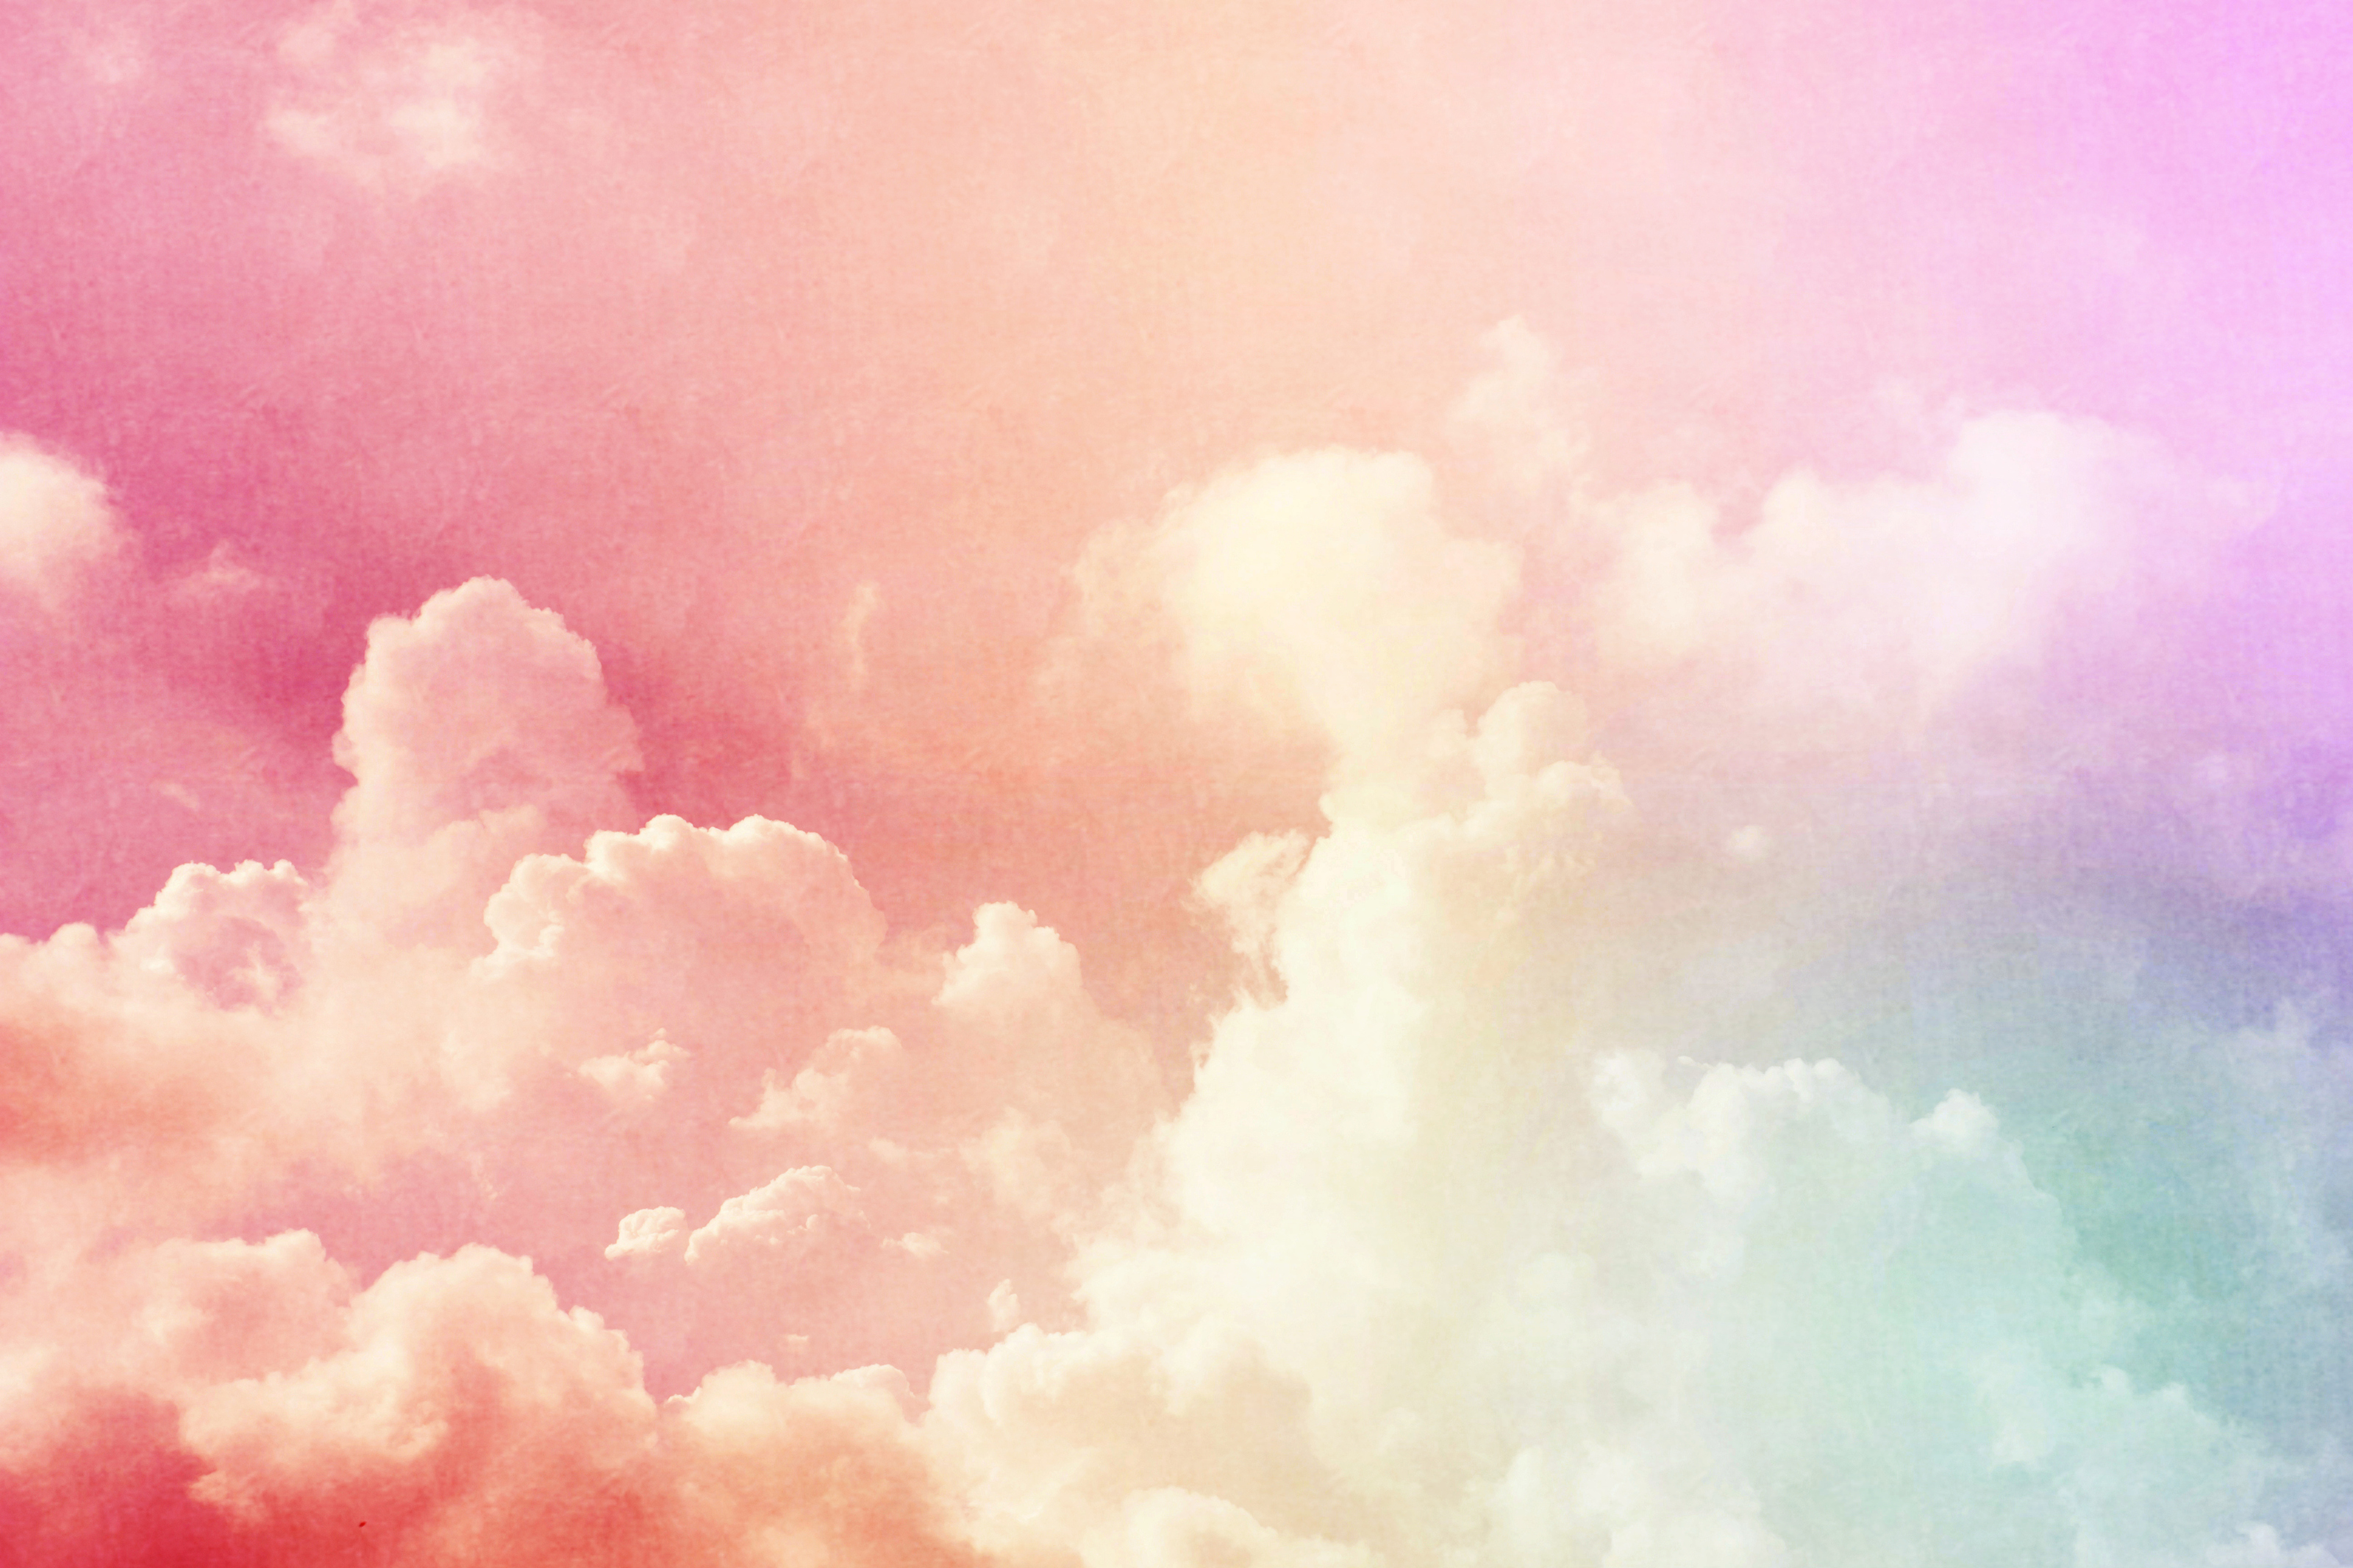 A colorful sky with clouds and an airplane - Pastel rainbow